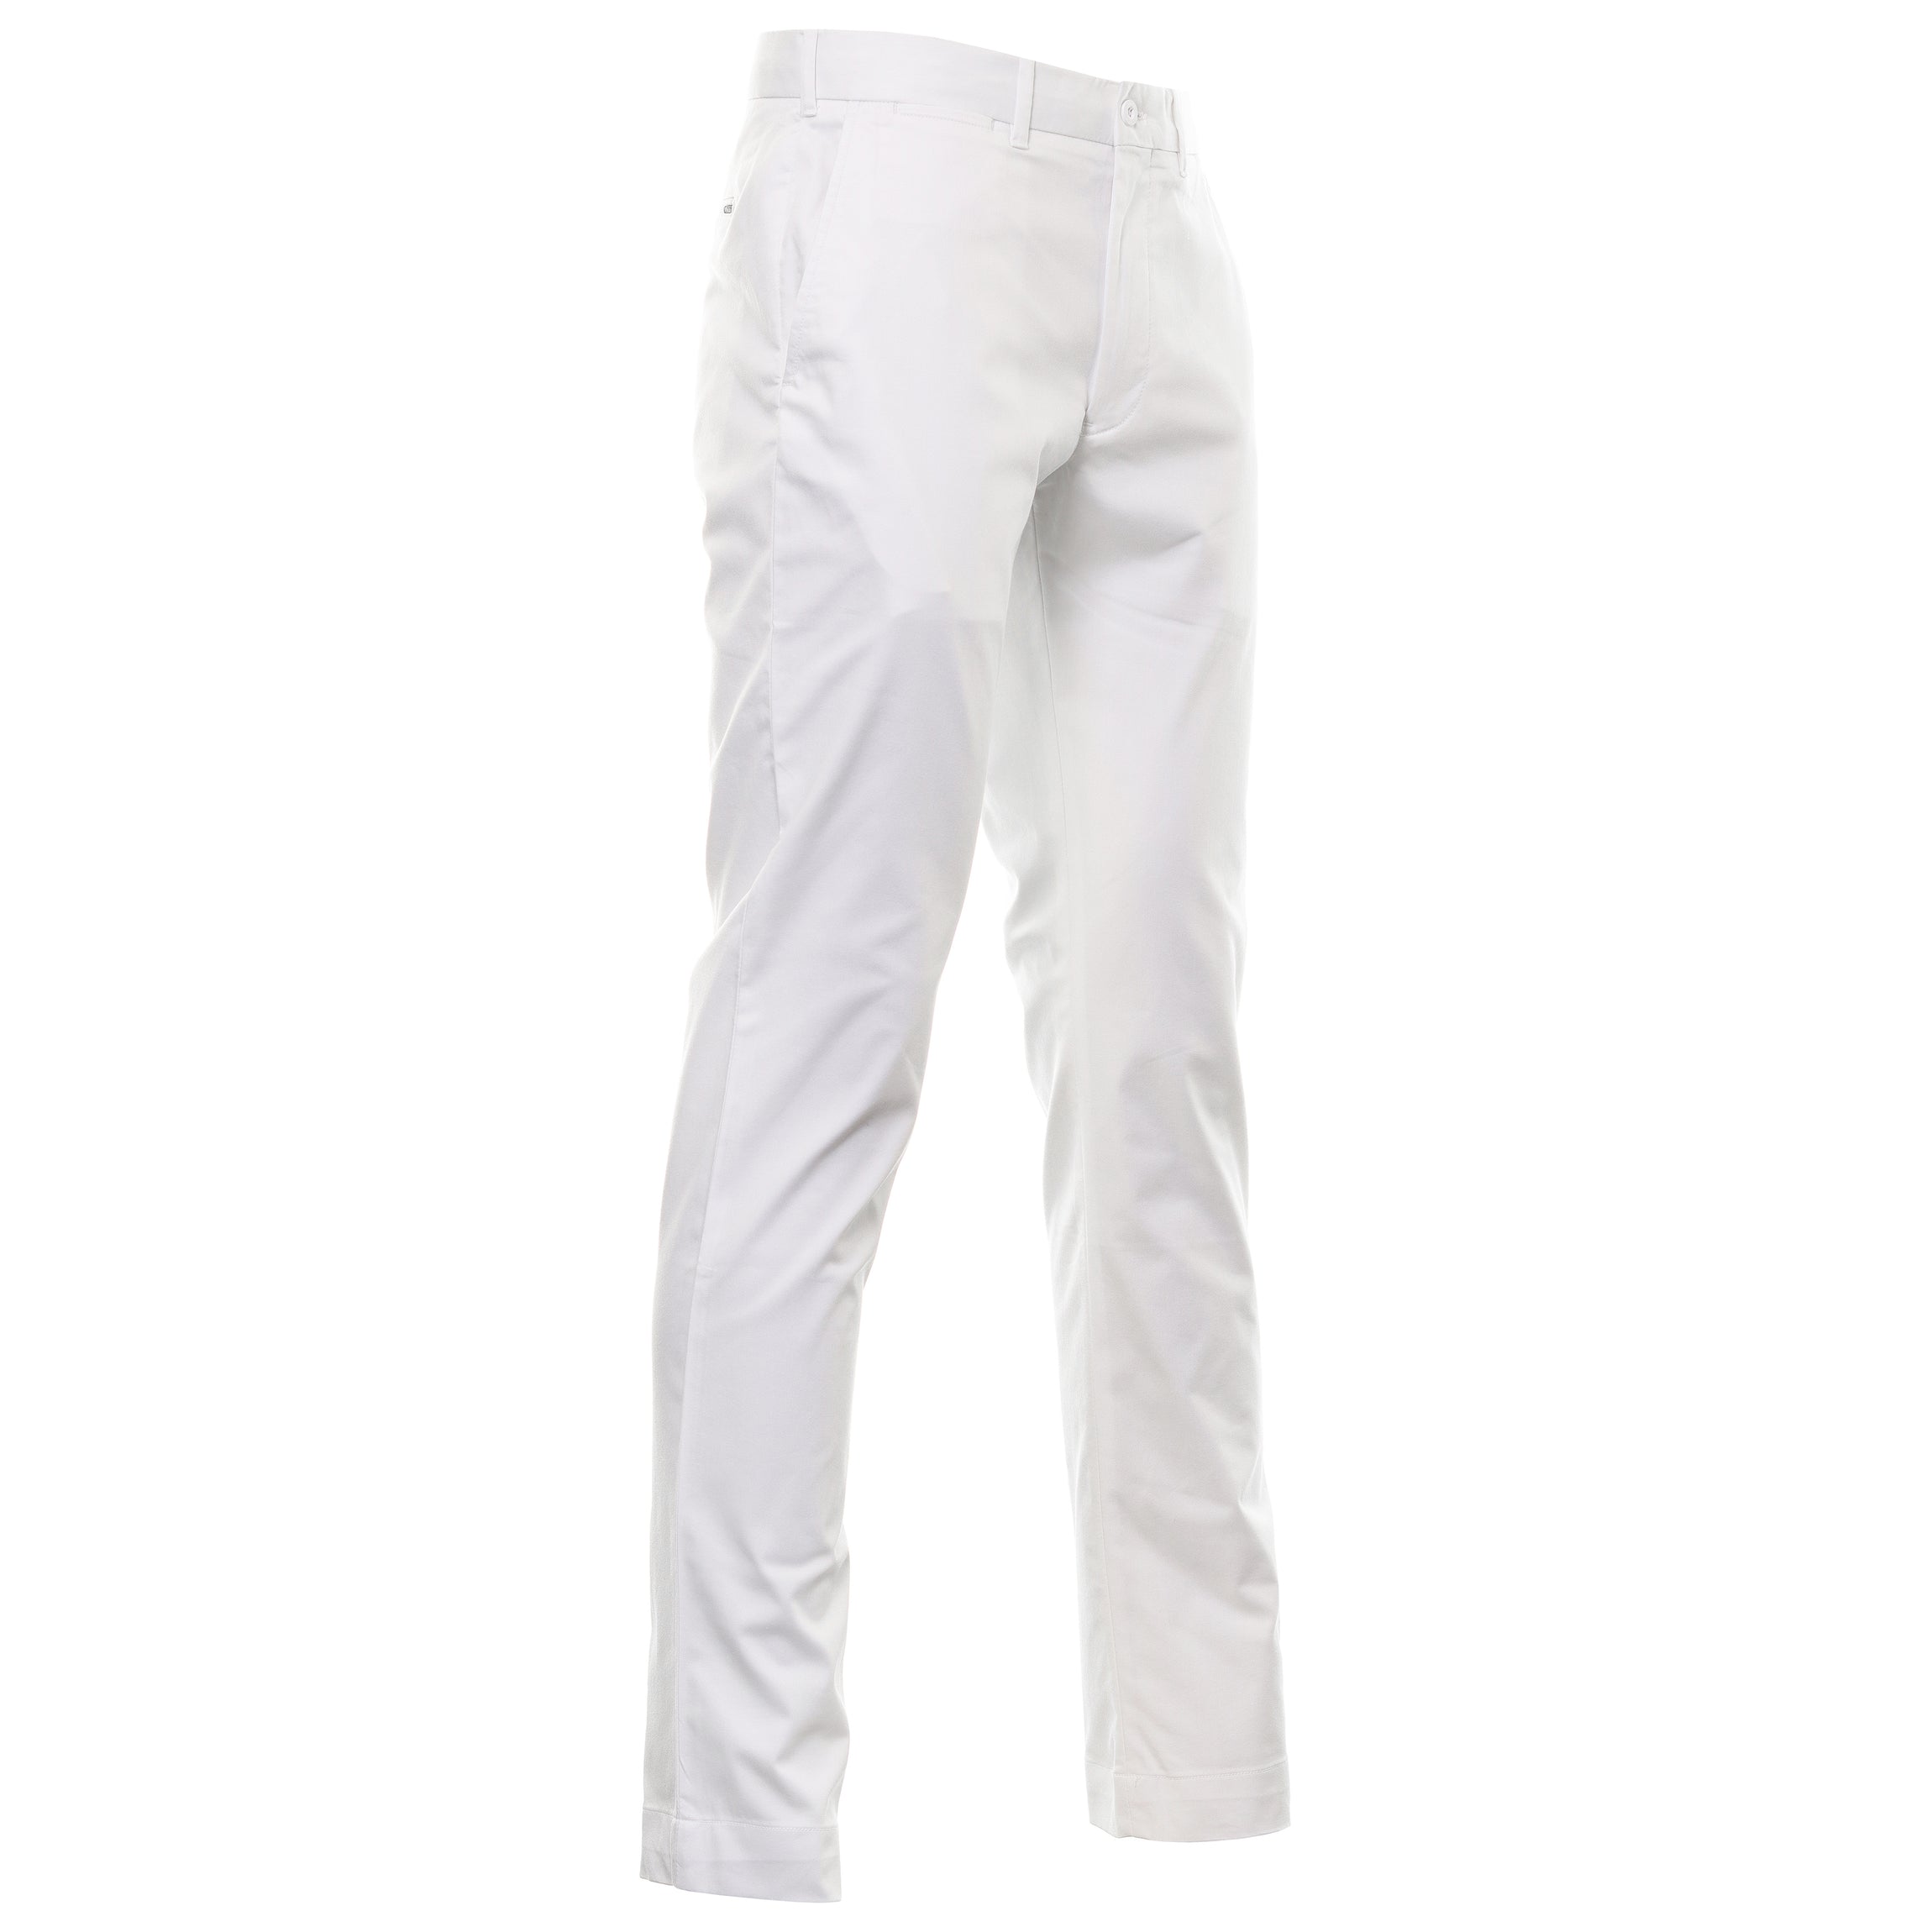 SALE!! Oakley 50's Pant 2.0 Cotton Twill Slim Fit Mens Retro Golf Trousers  - Golf Trousers and Clothing